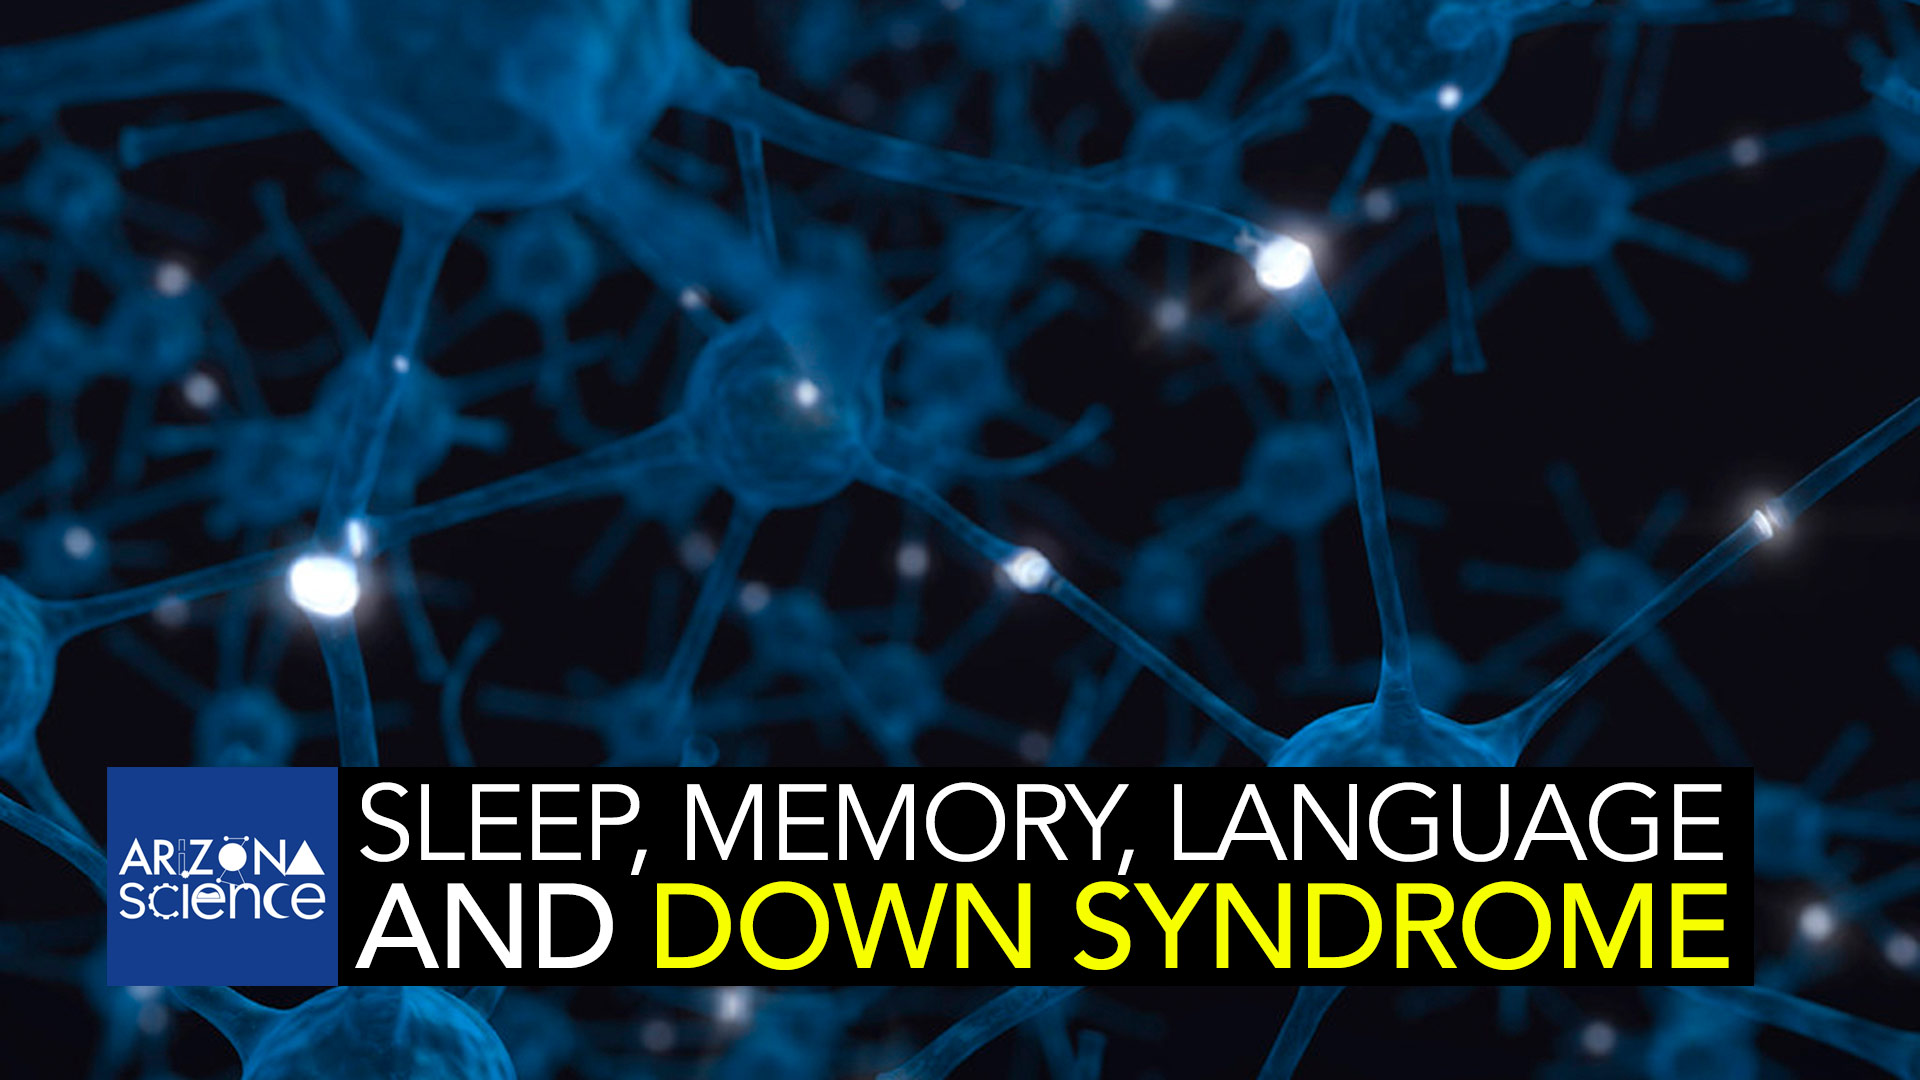 New University of Arizona sleep research suggests children with Down syndrome who experience poor sleep may have a harder time learning to communicate.